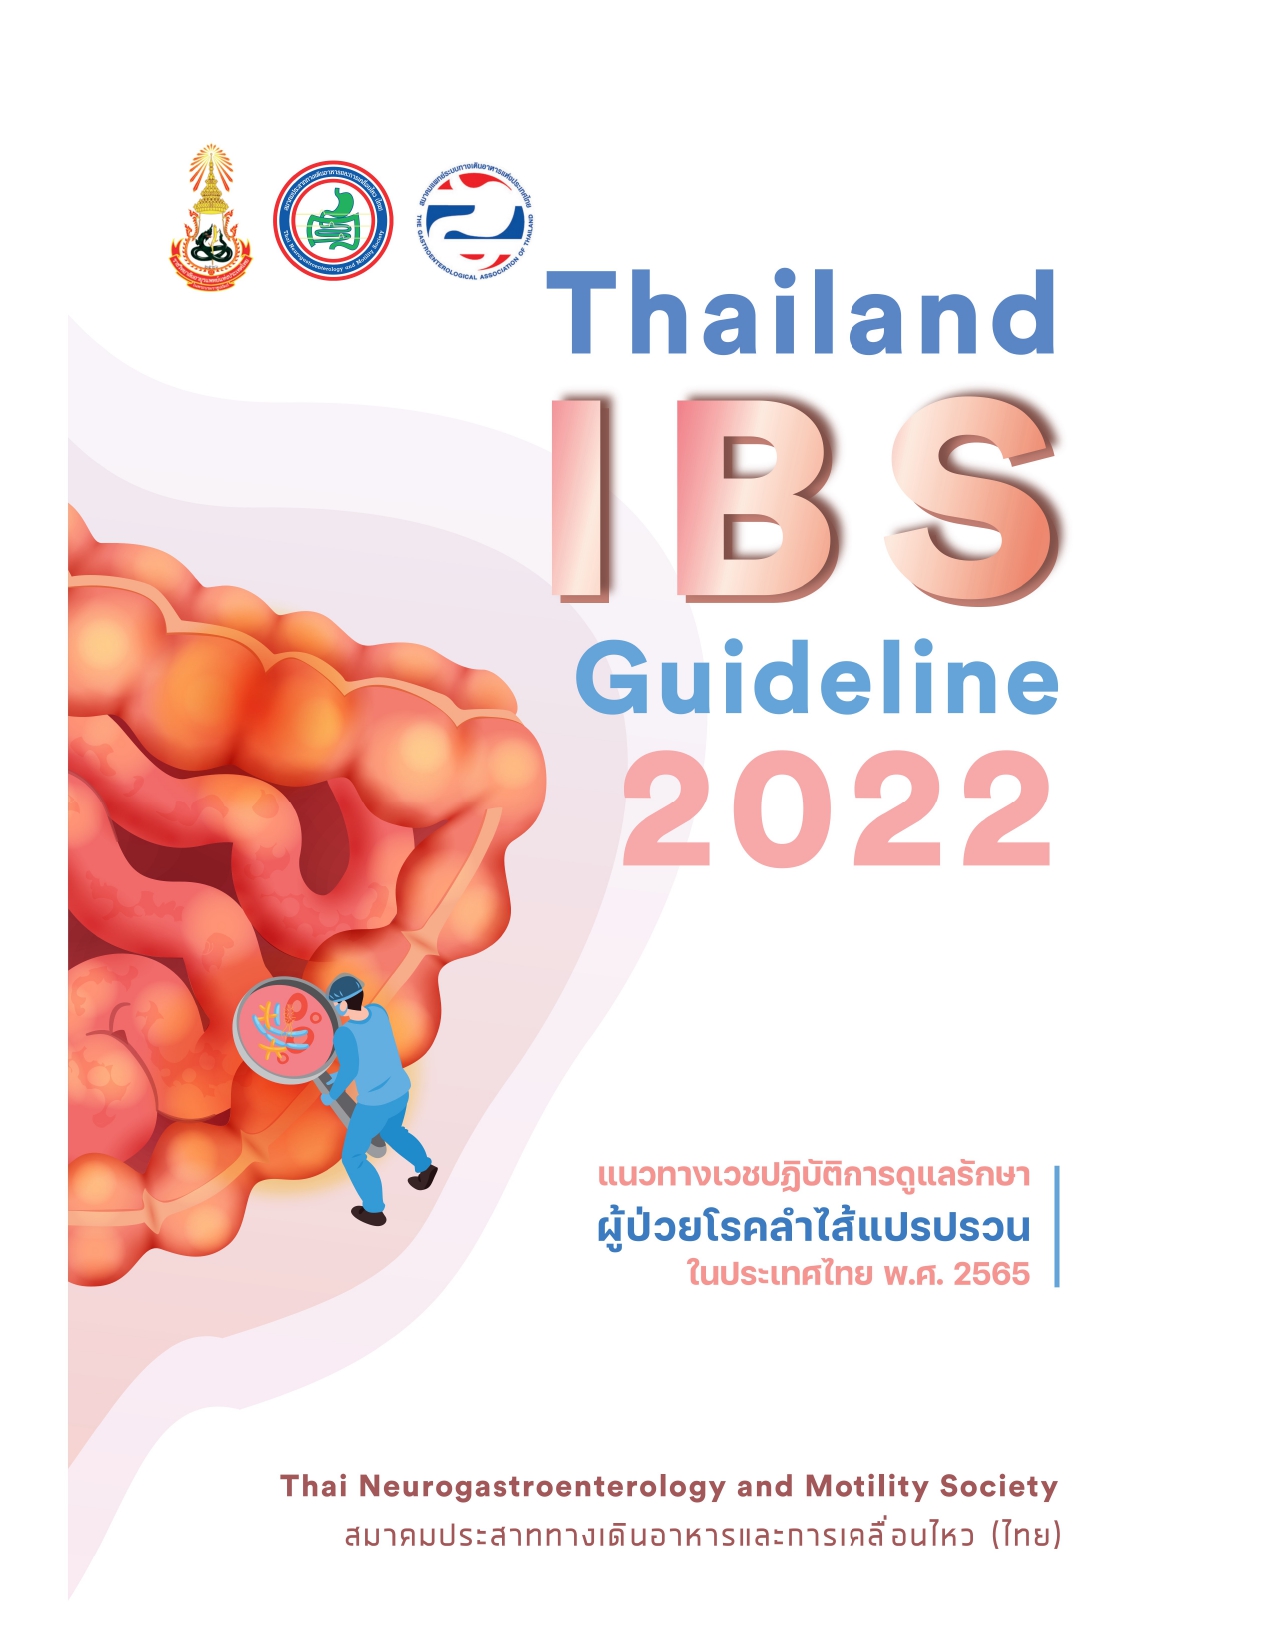 Thailand IBS Guideline 2022